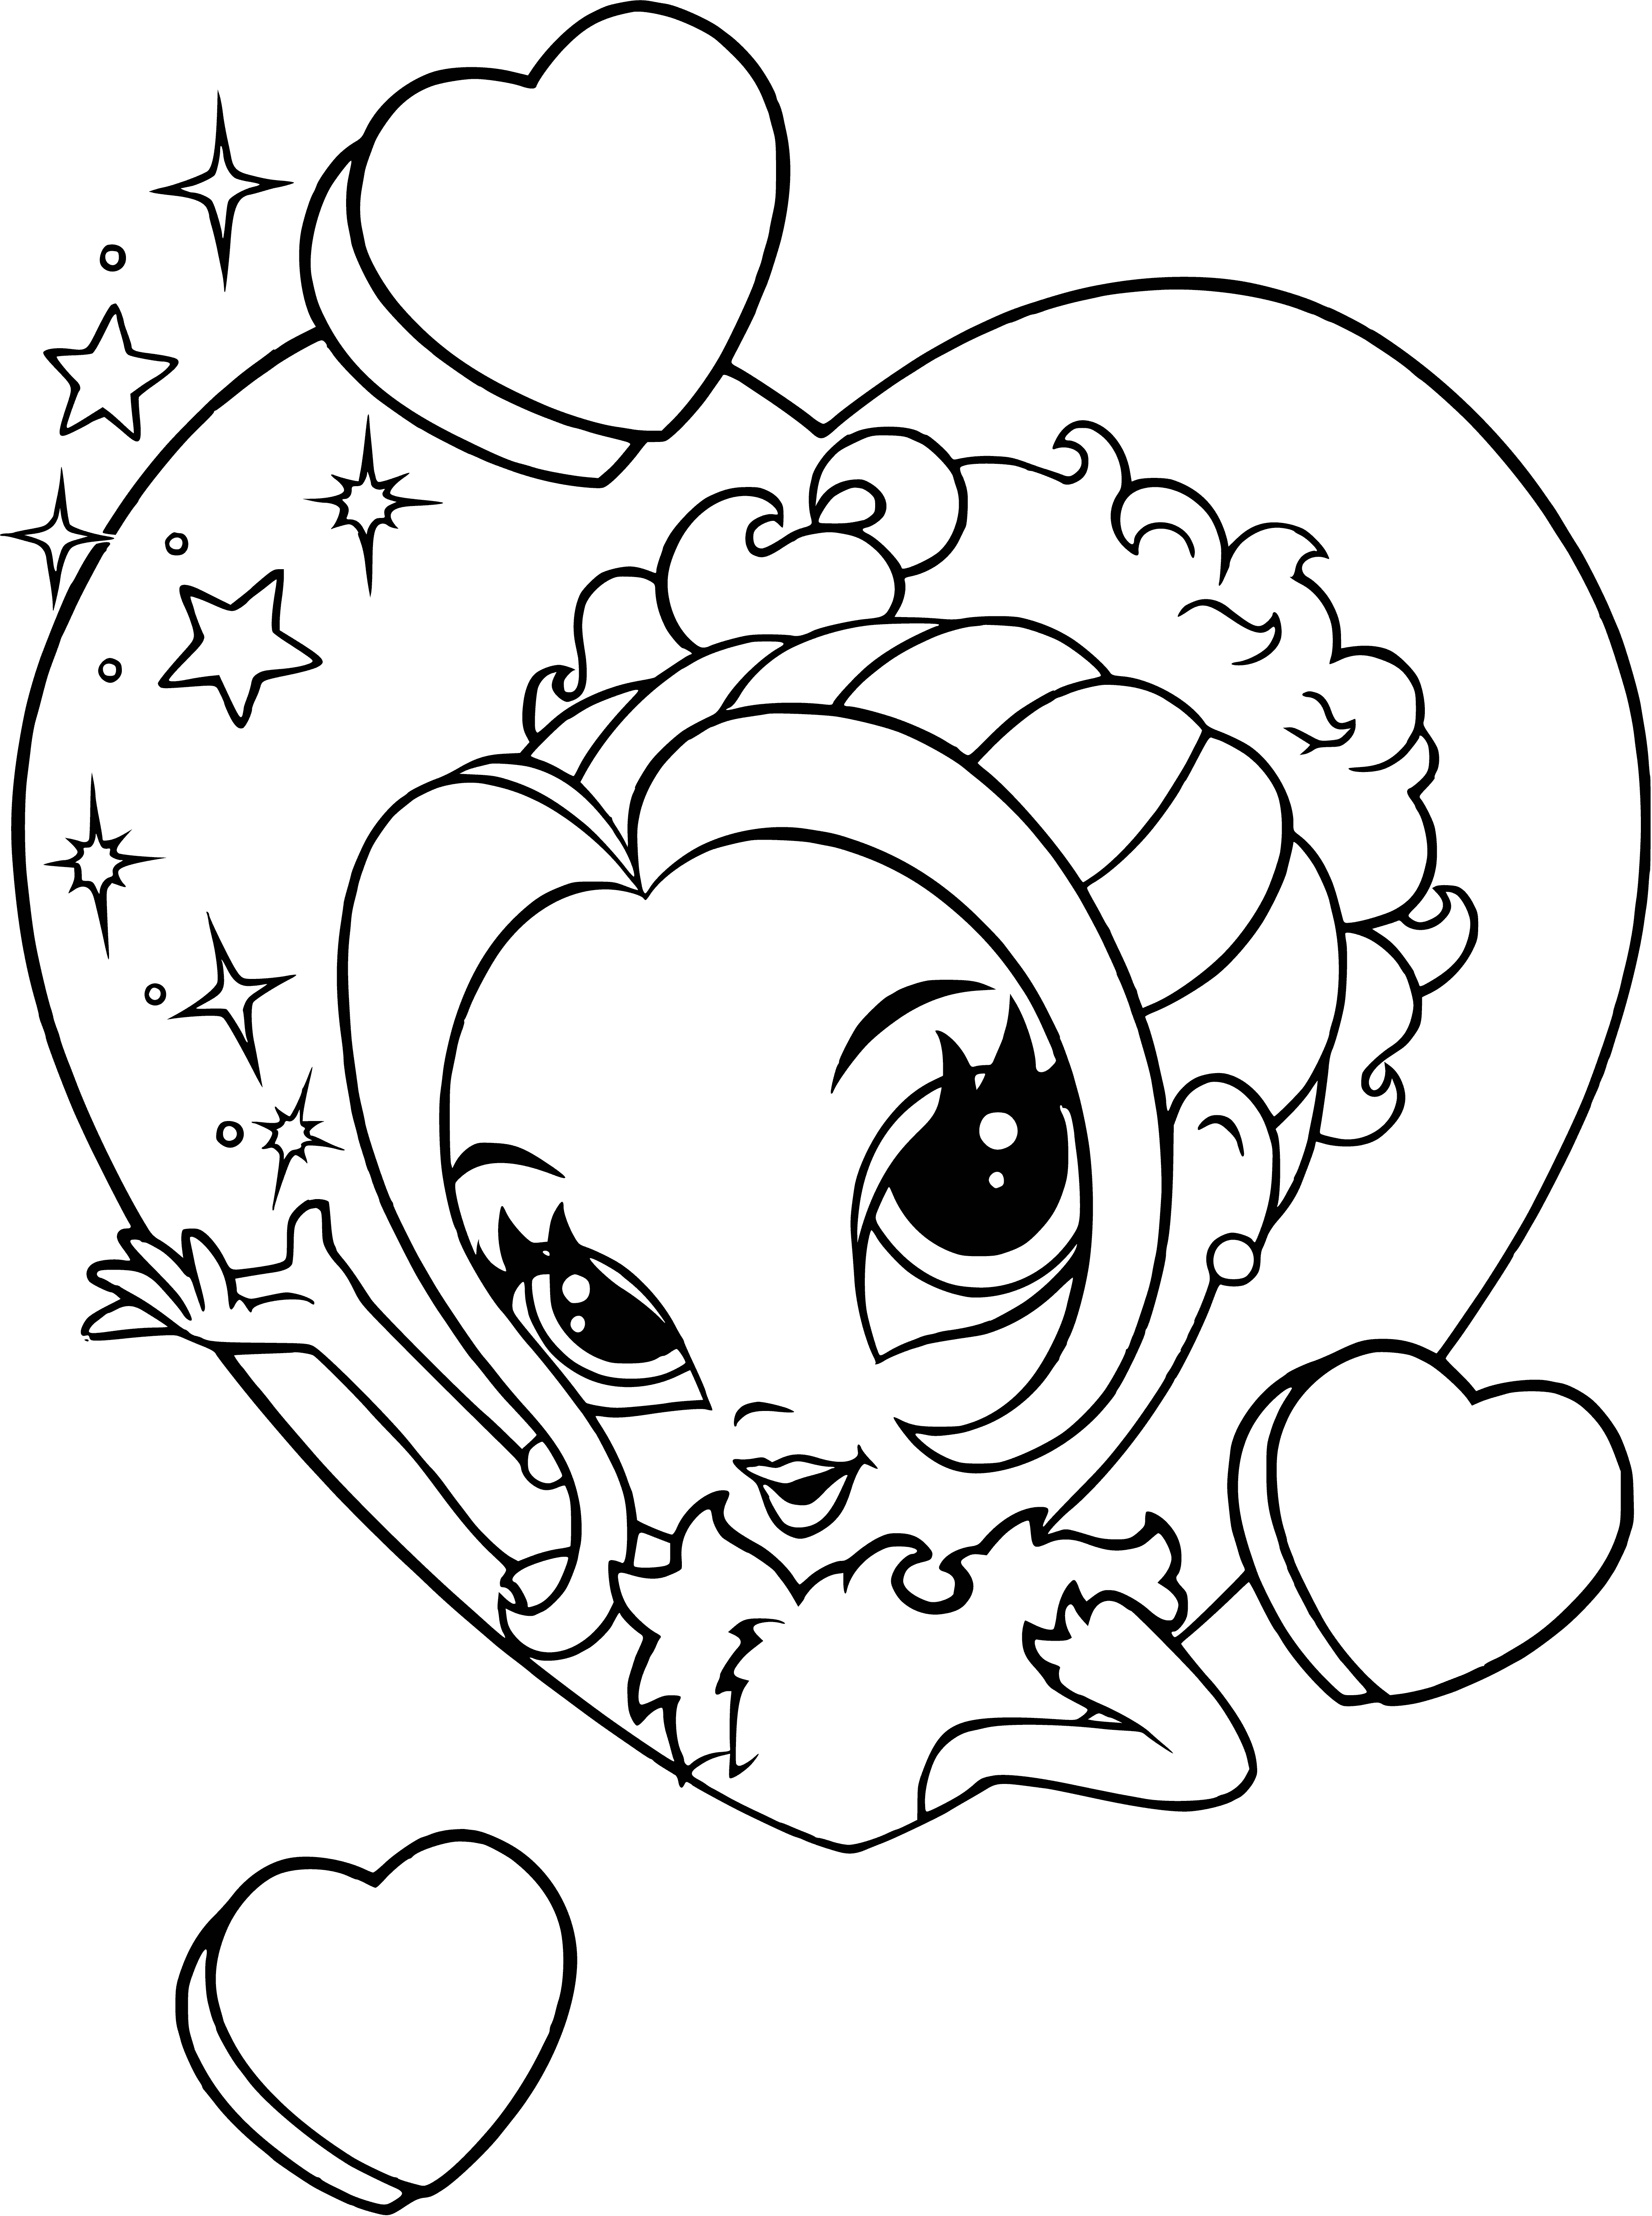 coloring page: Young woman: long, curly hair, bright smile, pink dress, glittery belt, pink purse & shoes.